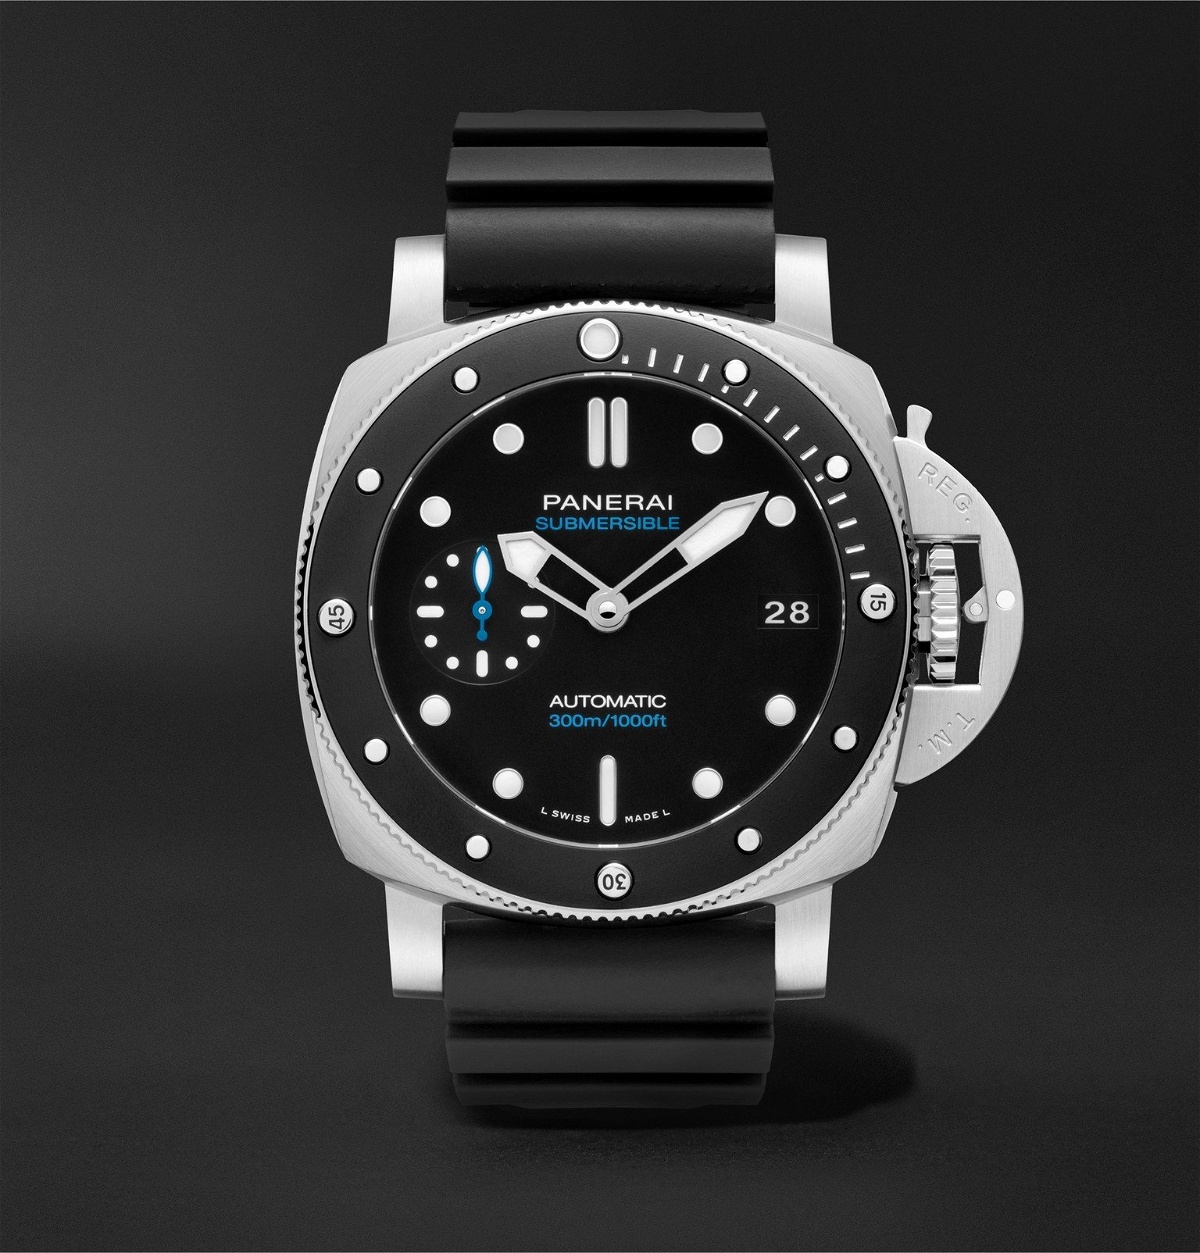 Photo: Panerai - Submersible Automatic 42mm Goldtech and Alligator Watch, Ref. No. PAM00974 - Black